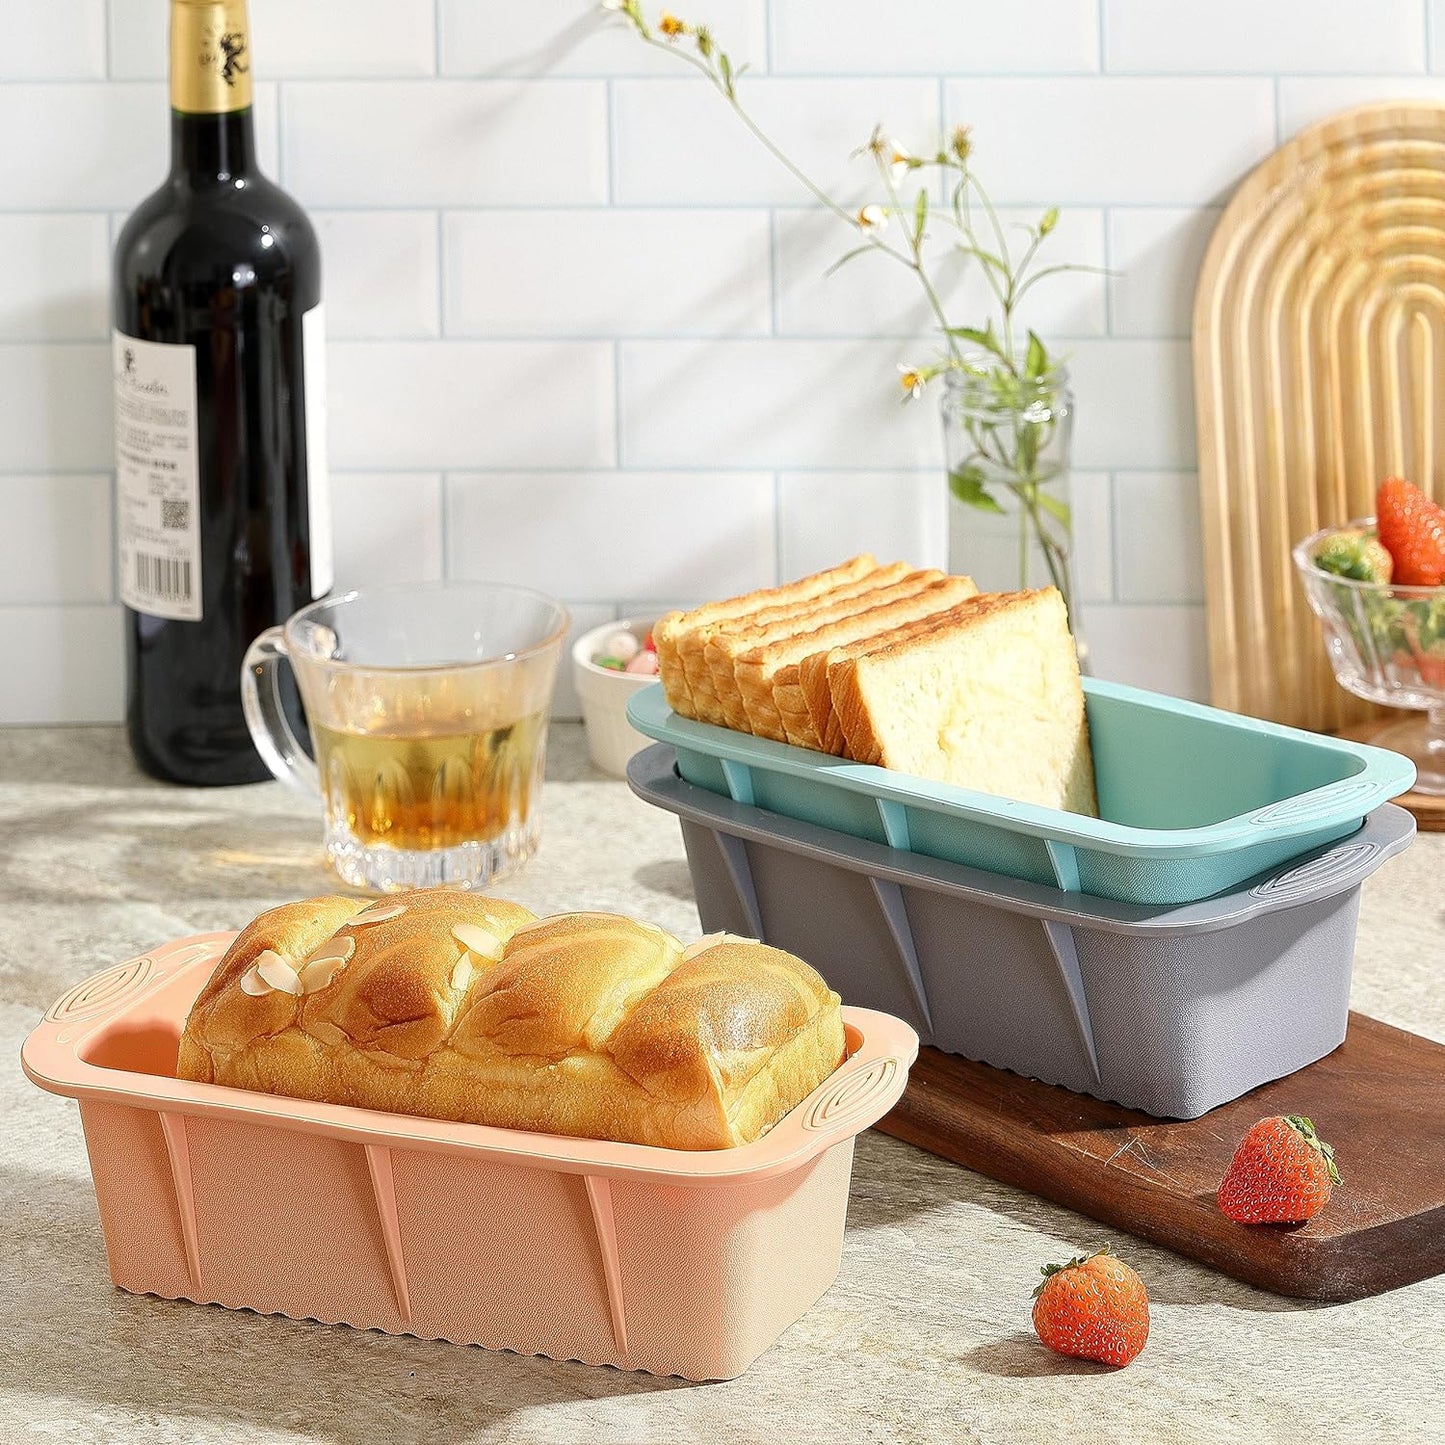 3PCS Silicone Bread Loaf Pan, Non-Stick Bread Pans for Baking, Easy Release Loaf Pan, Great for Homemade Bread, Cakes, Brownies, Dishwasher Safe (3 Colors, Nesting Design)